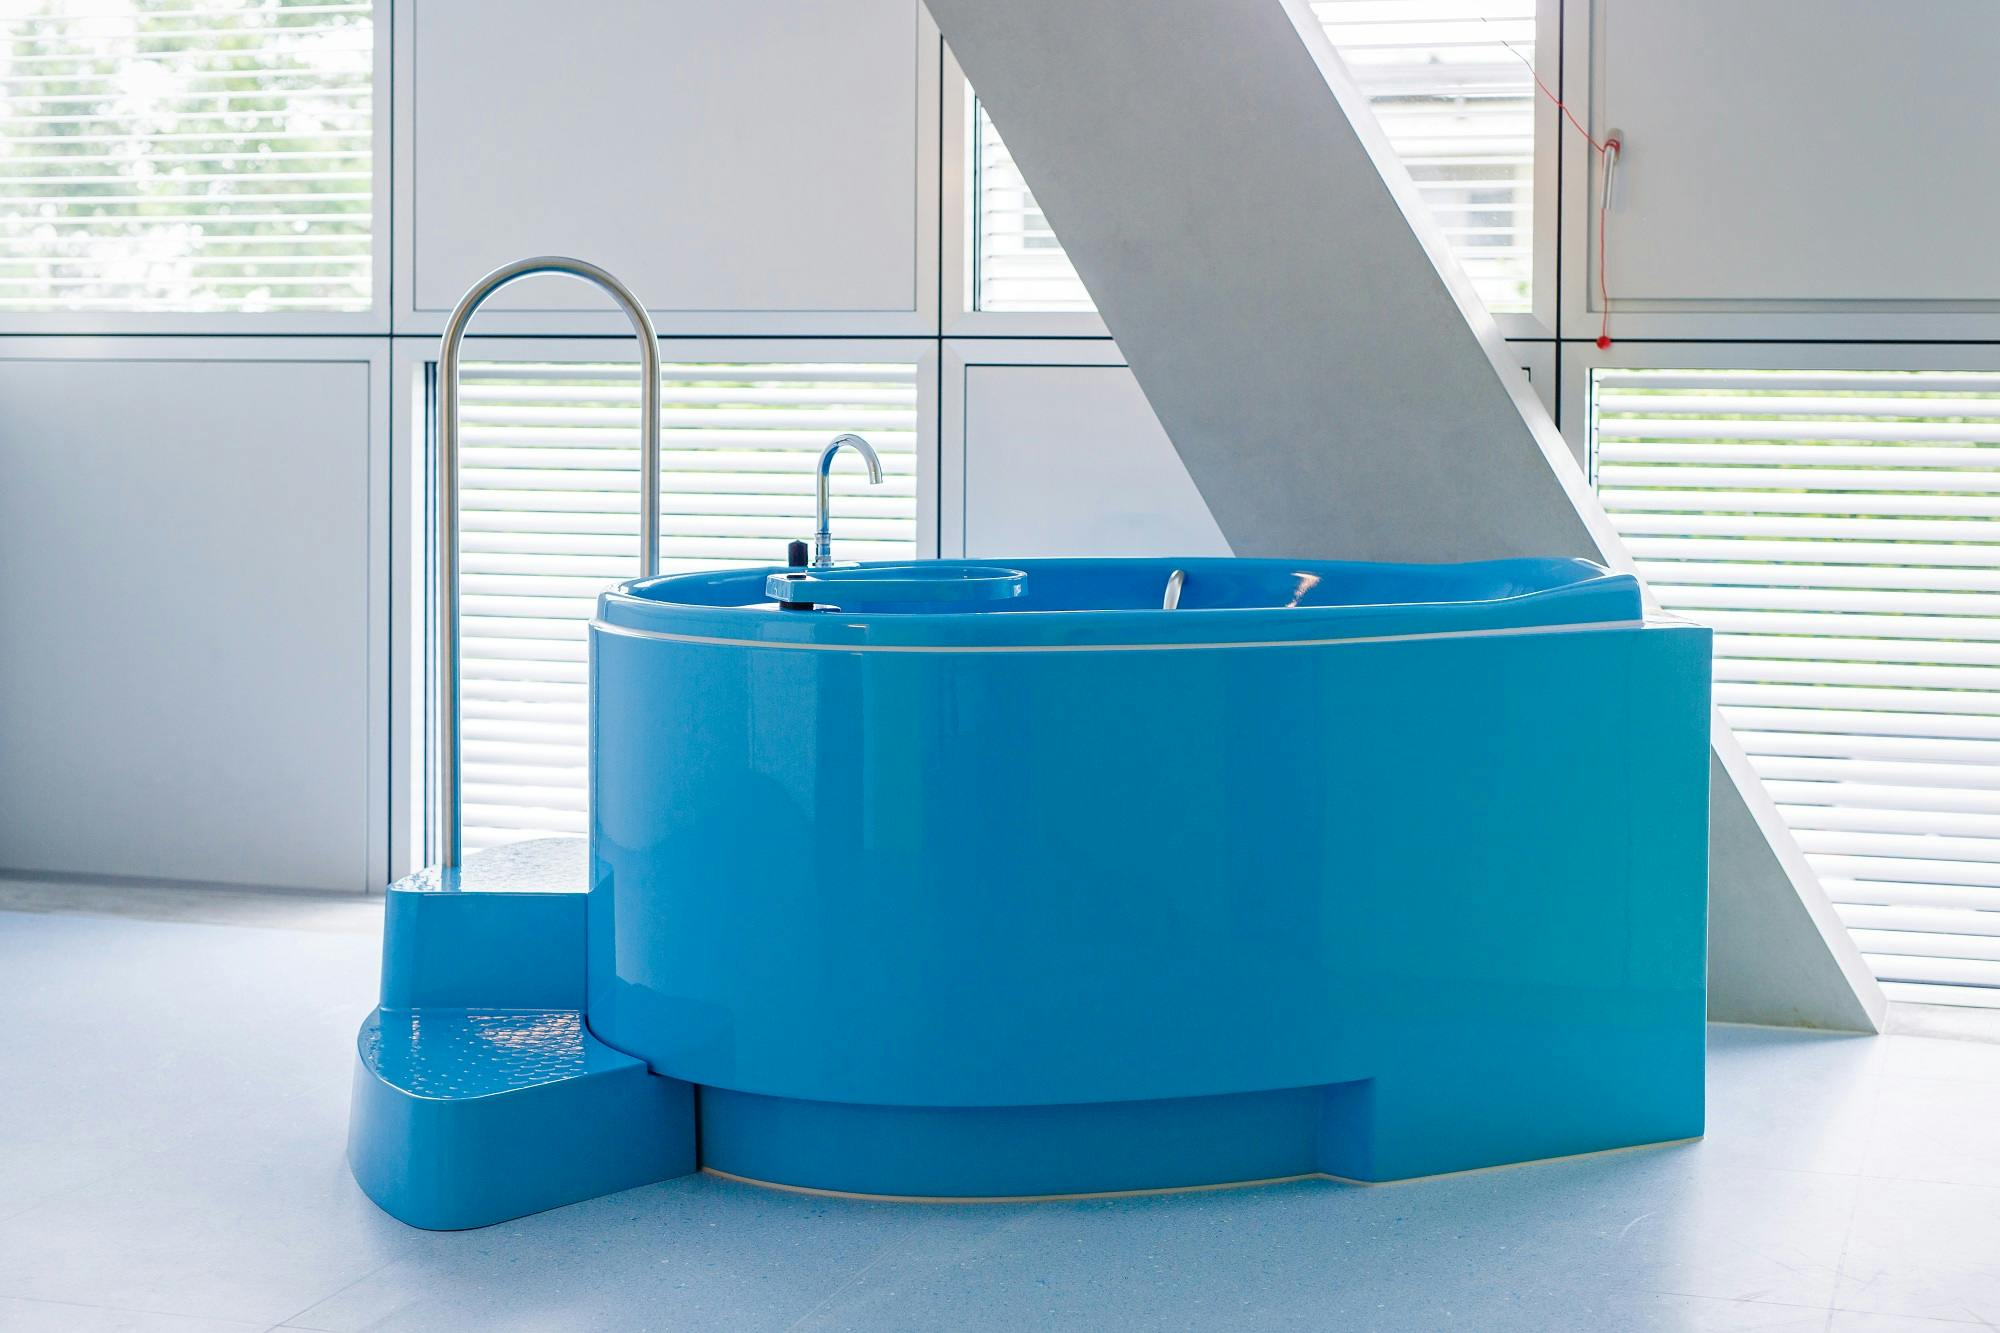 Modern blue round pool in a light-coloured interior with steps and stainless steel shower fitting.